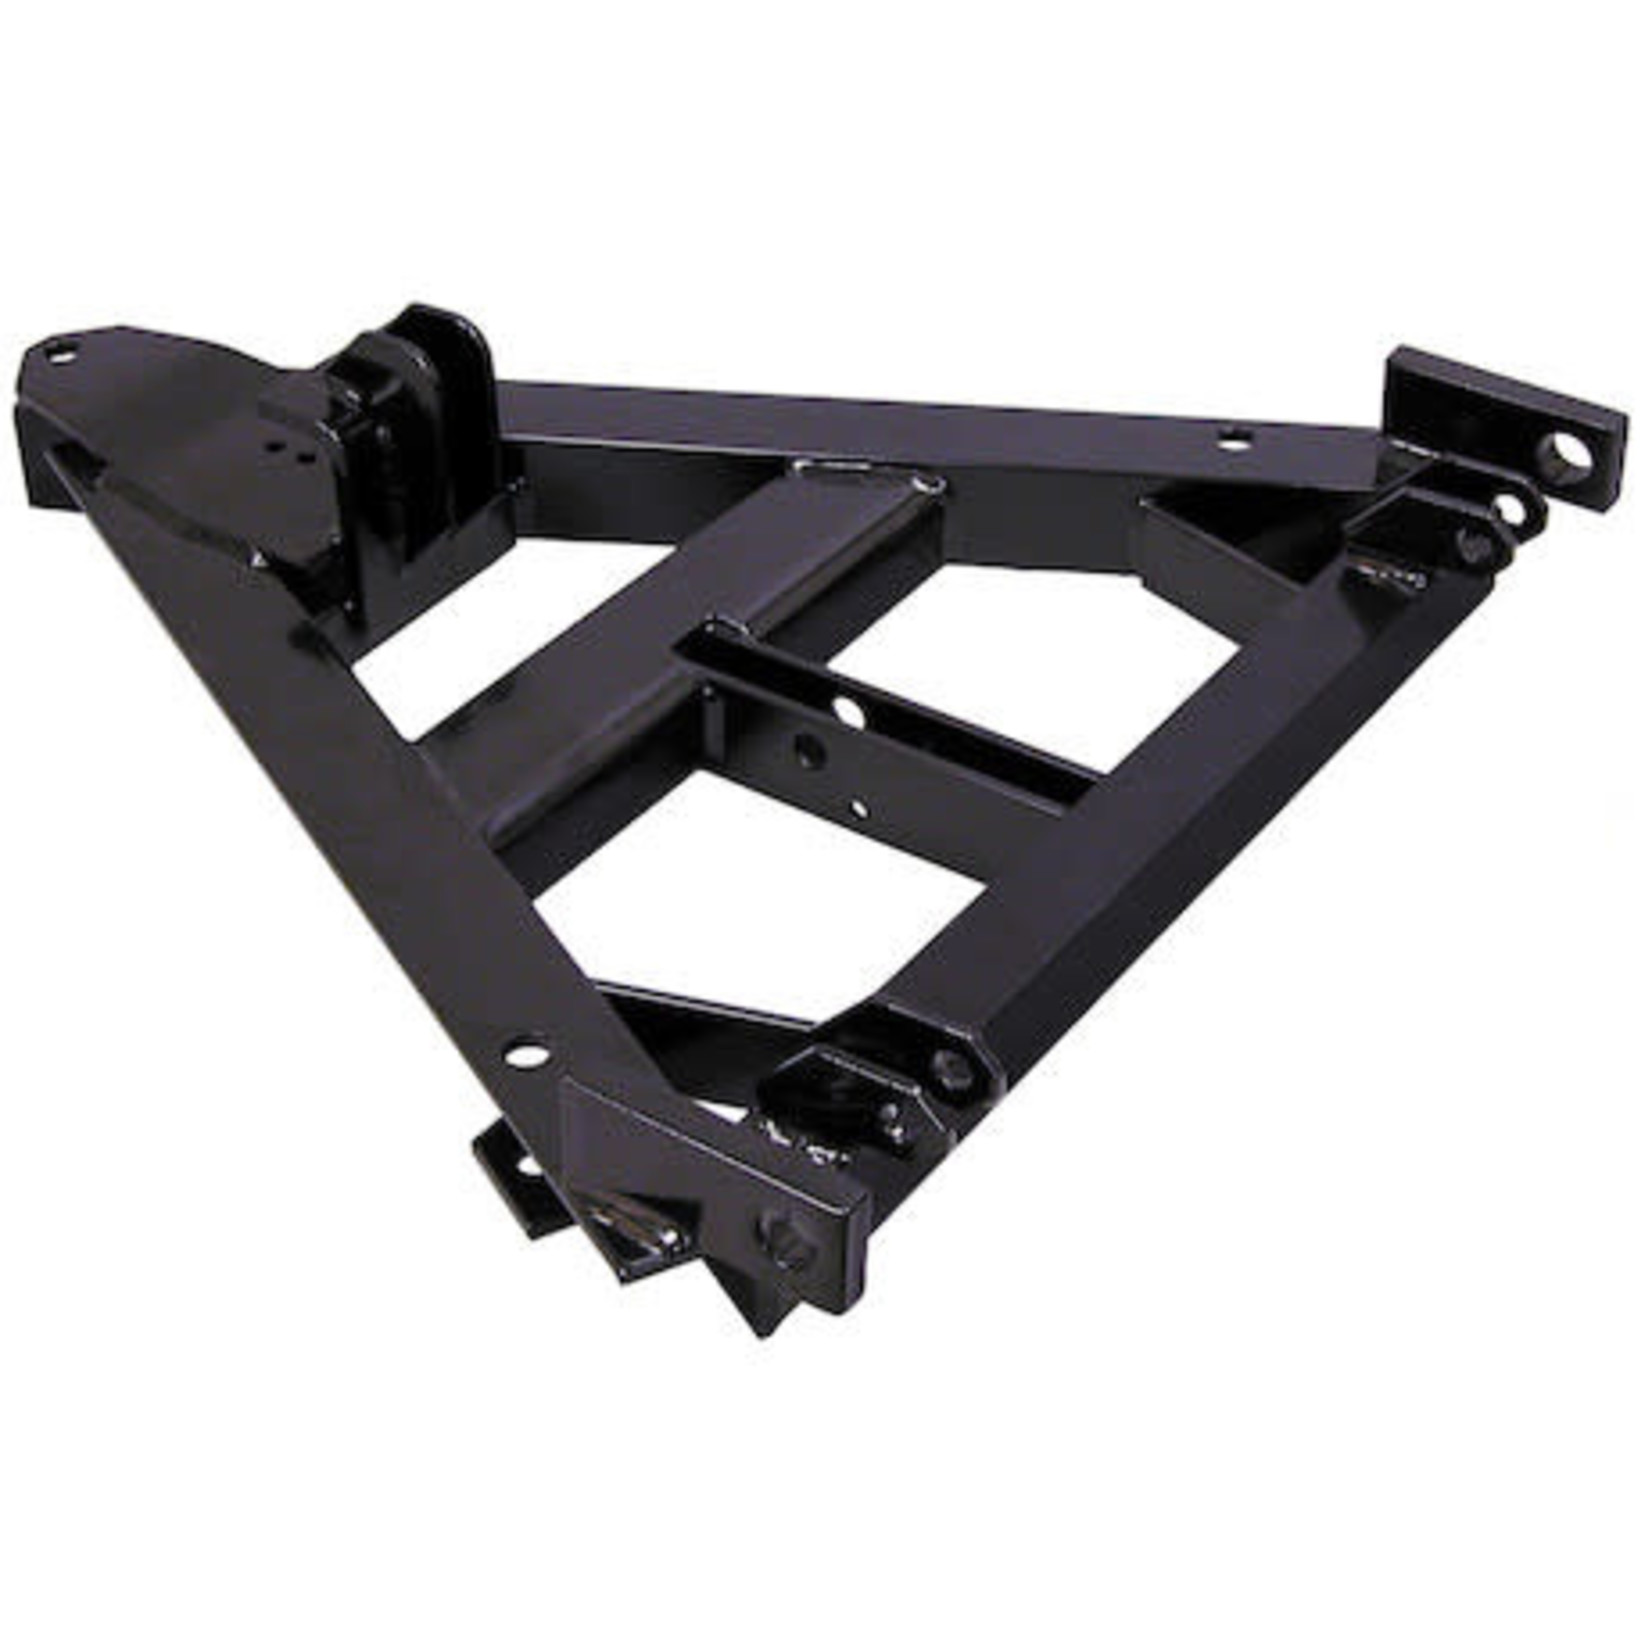 SAM SAM A-Frame For Standard Plow-Replaces Western #61891